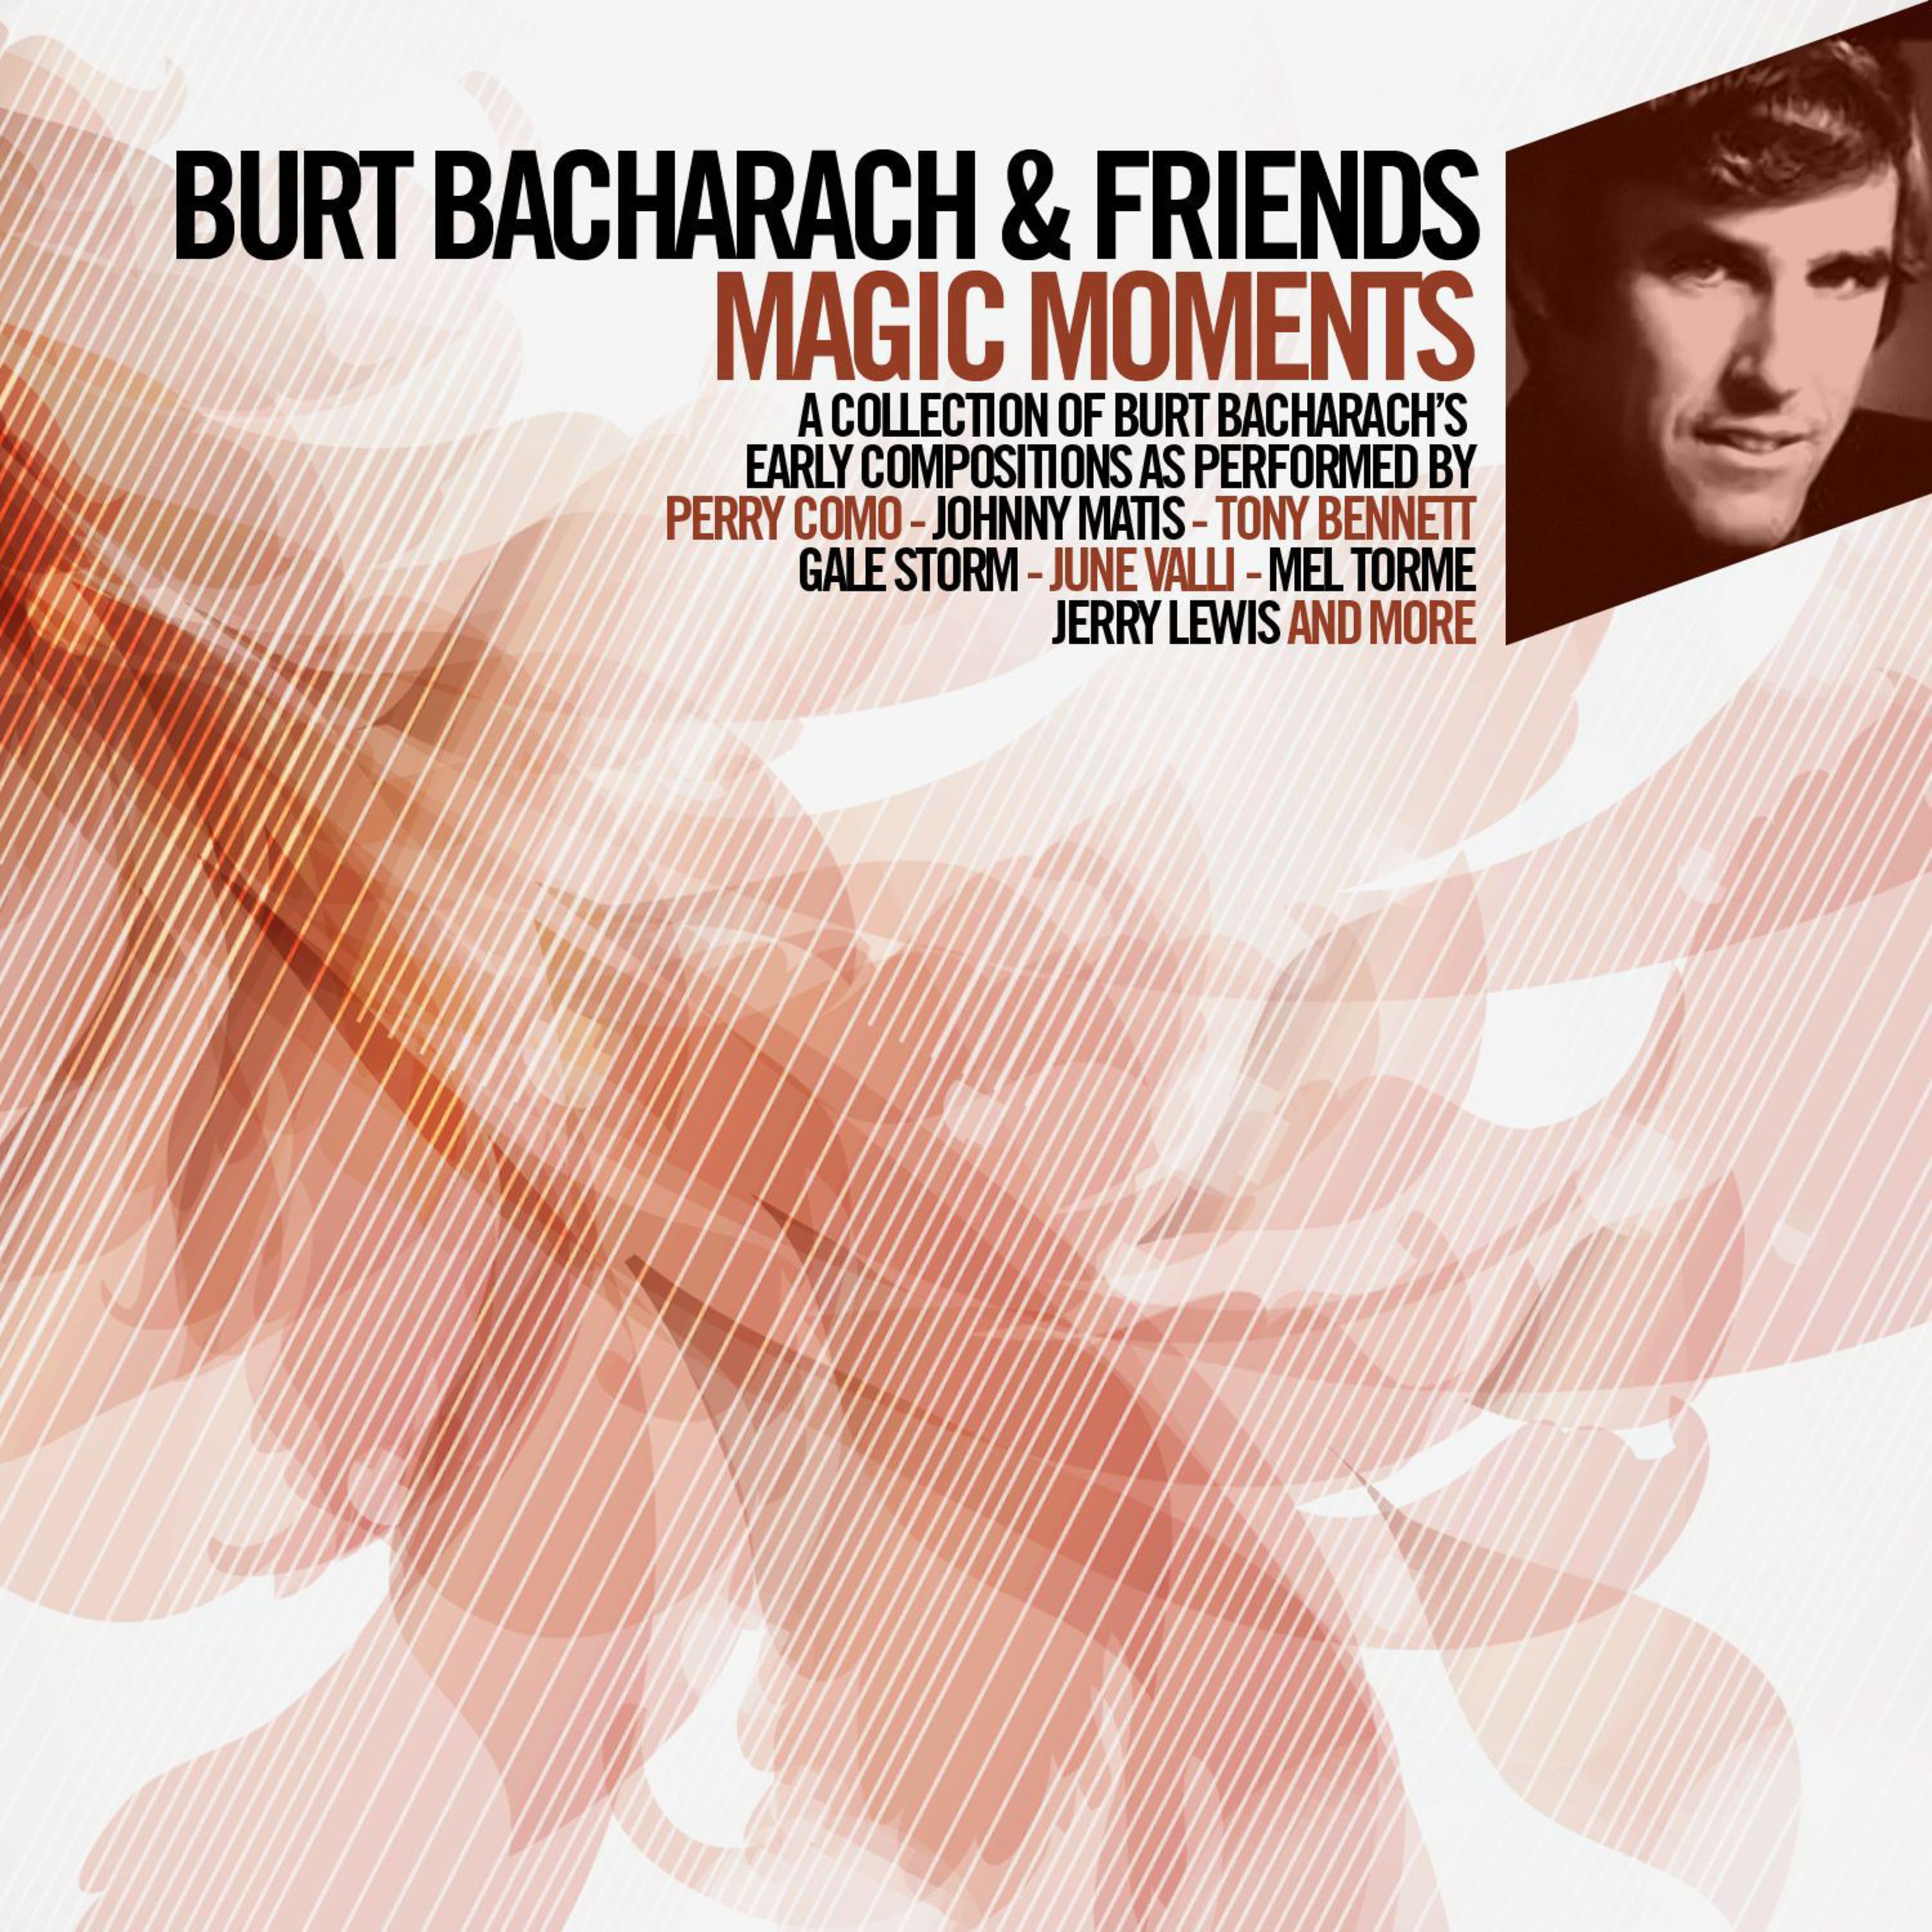 Magic Moments (A Collection of Bacharach's Early Compositions)